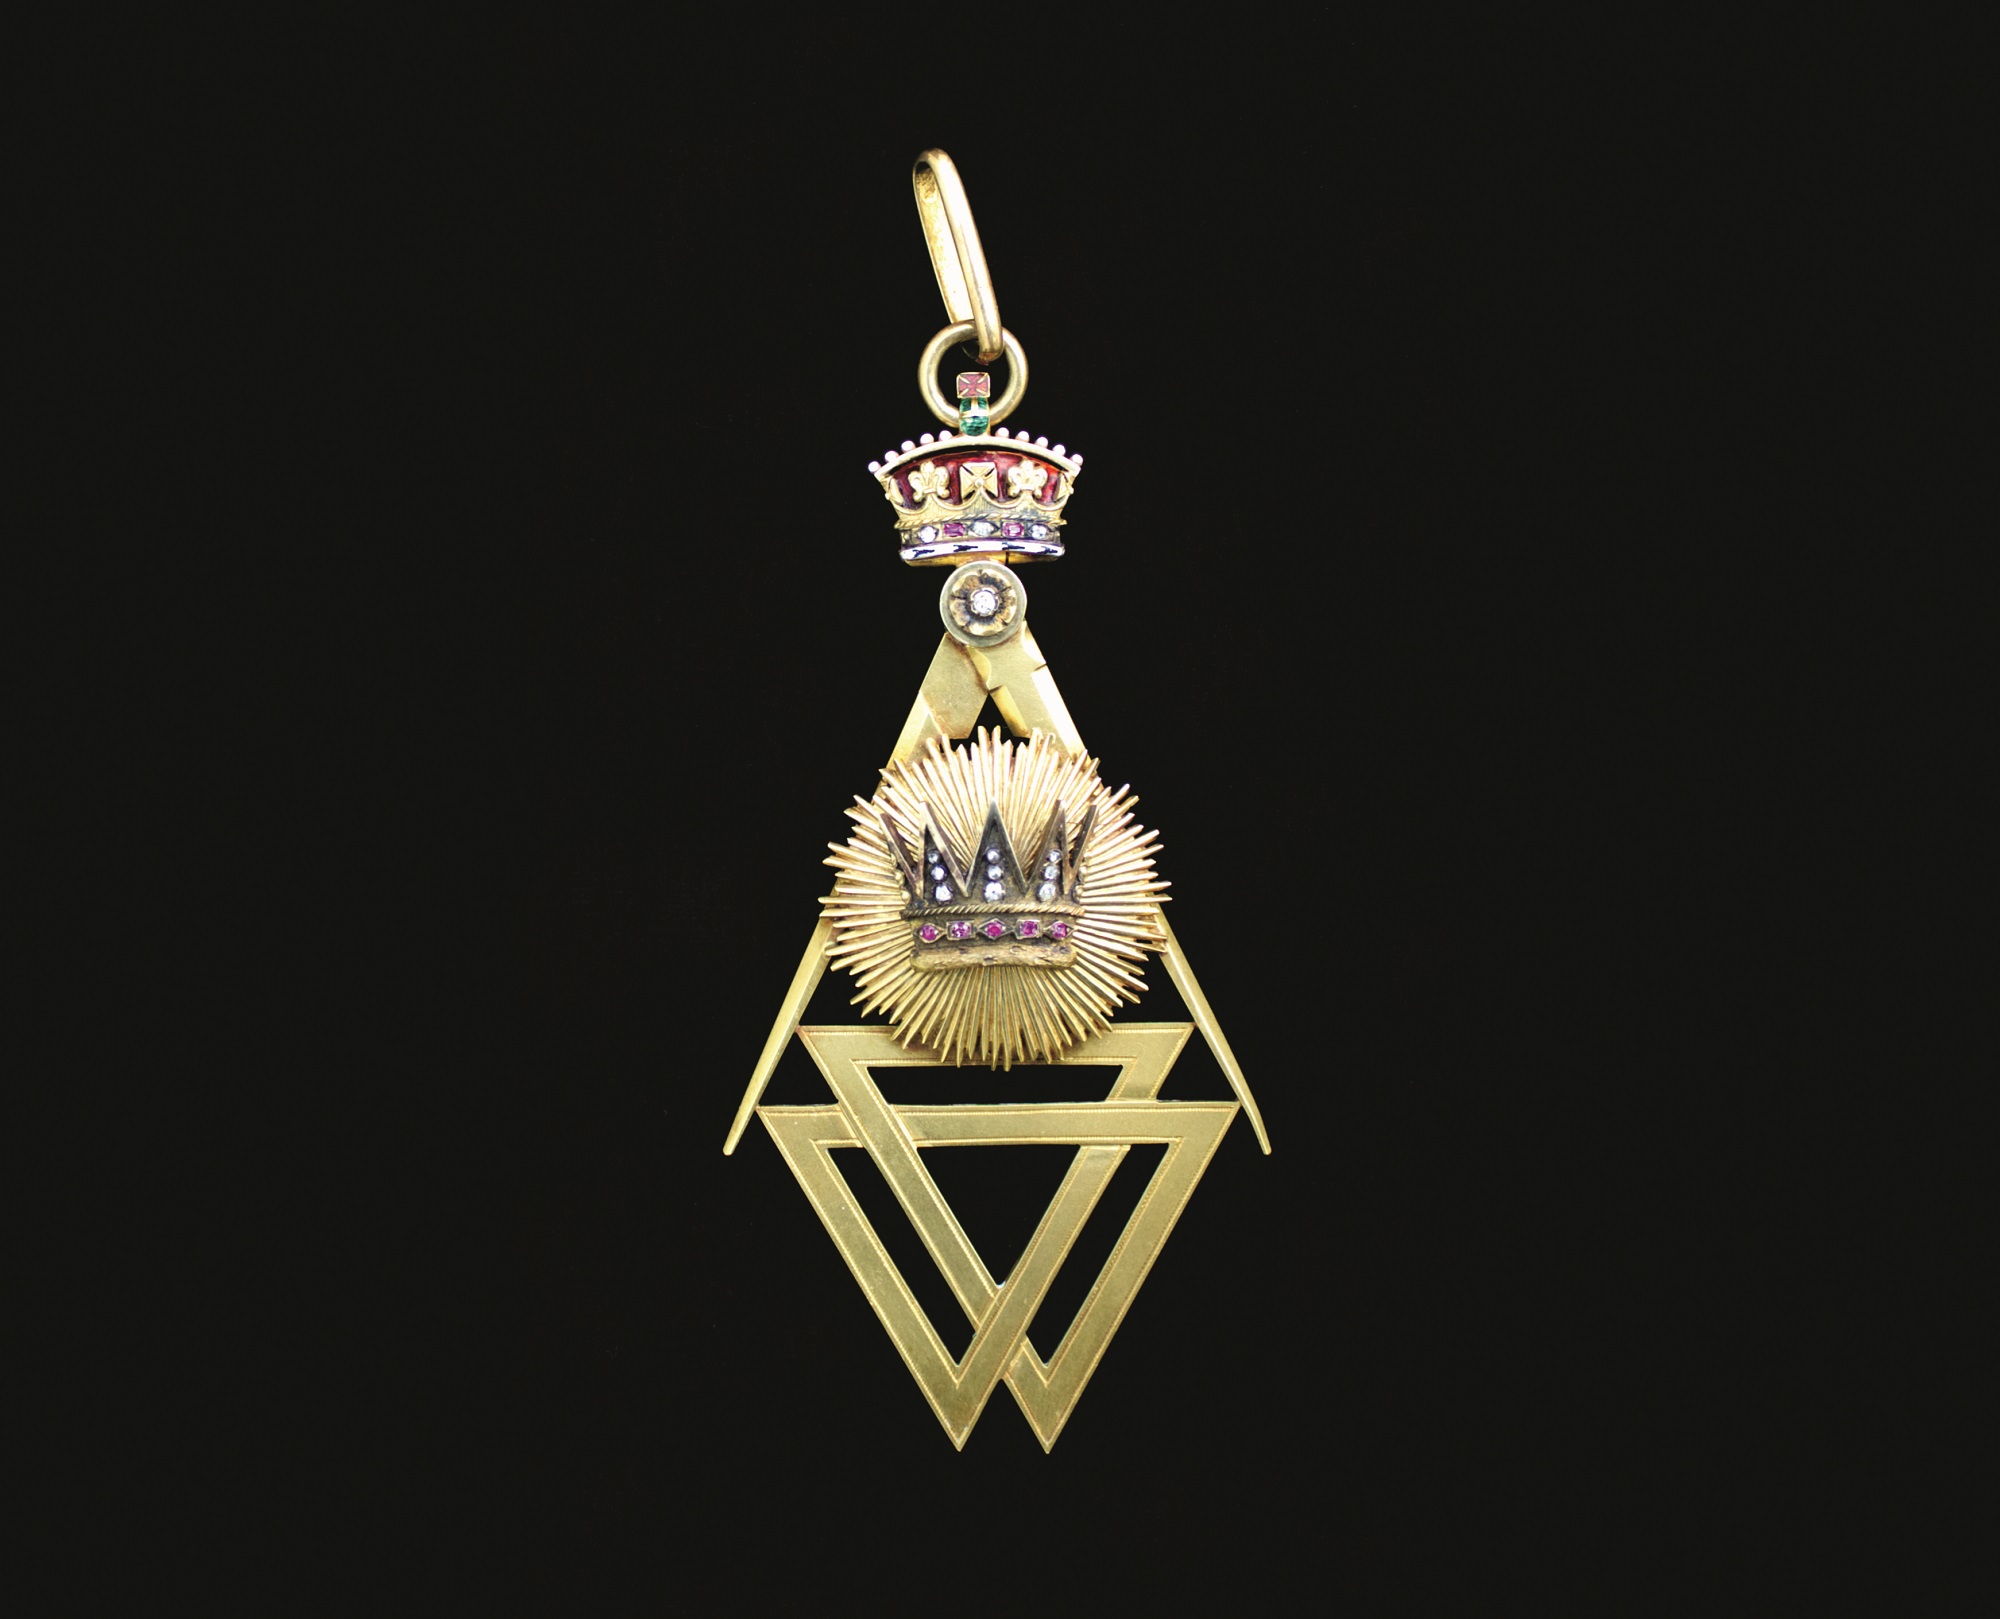 The First Grand Principal of the Supreme Grand Chapter of England and Wales Jewel, made for the Prince of Wales in 1874